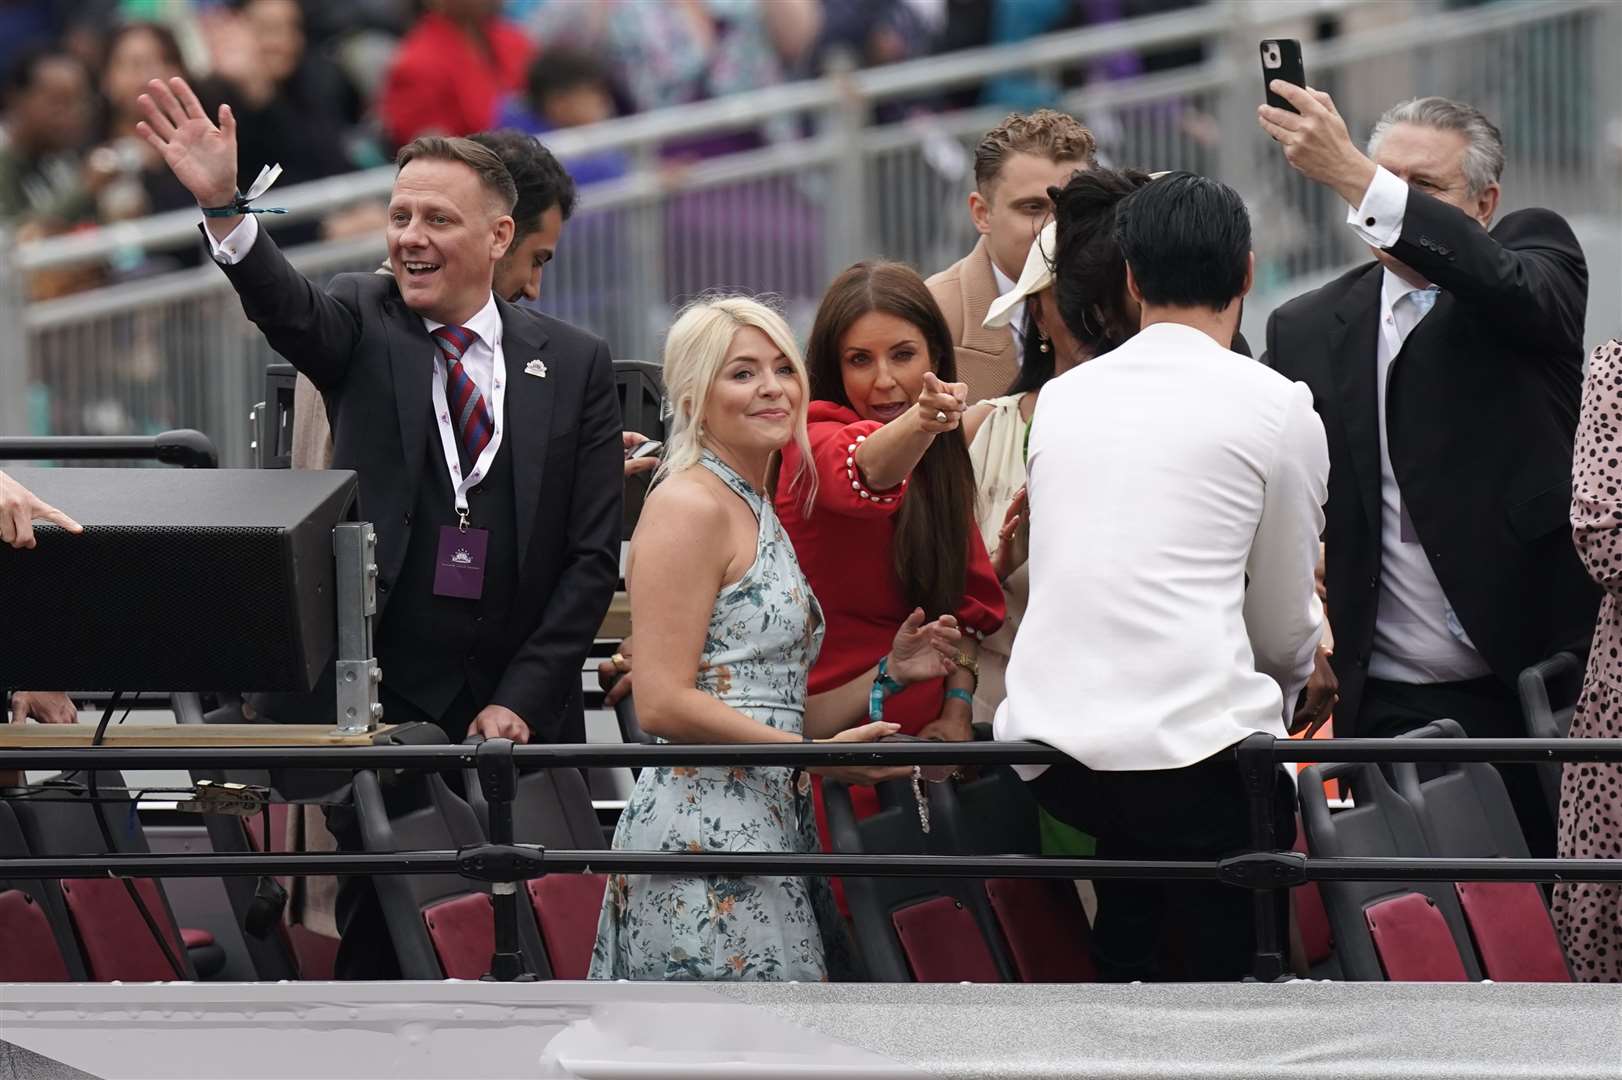 Holly Willoughby praised the Queen as an ‘iconic lady’ as she travelled in the 2010s bus (Aaron Chown/PA)